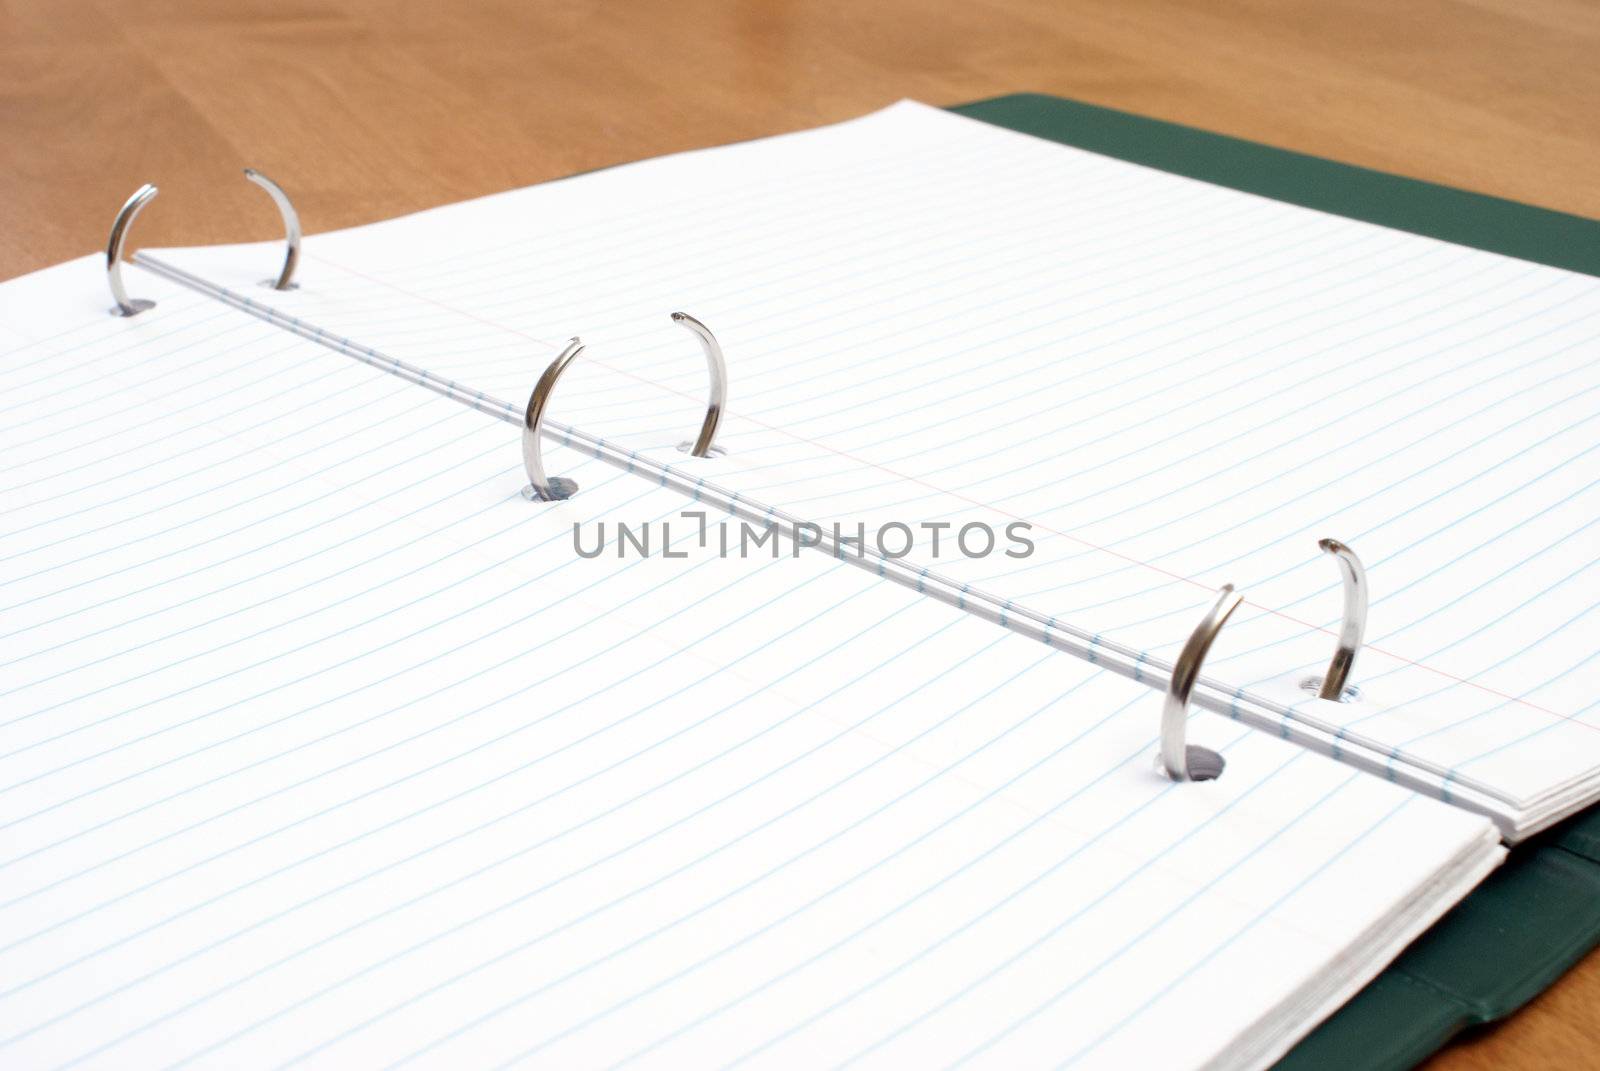 An opened binder with lined paper and rings ready for inserts.